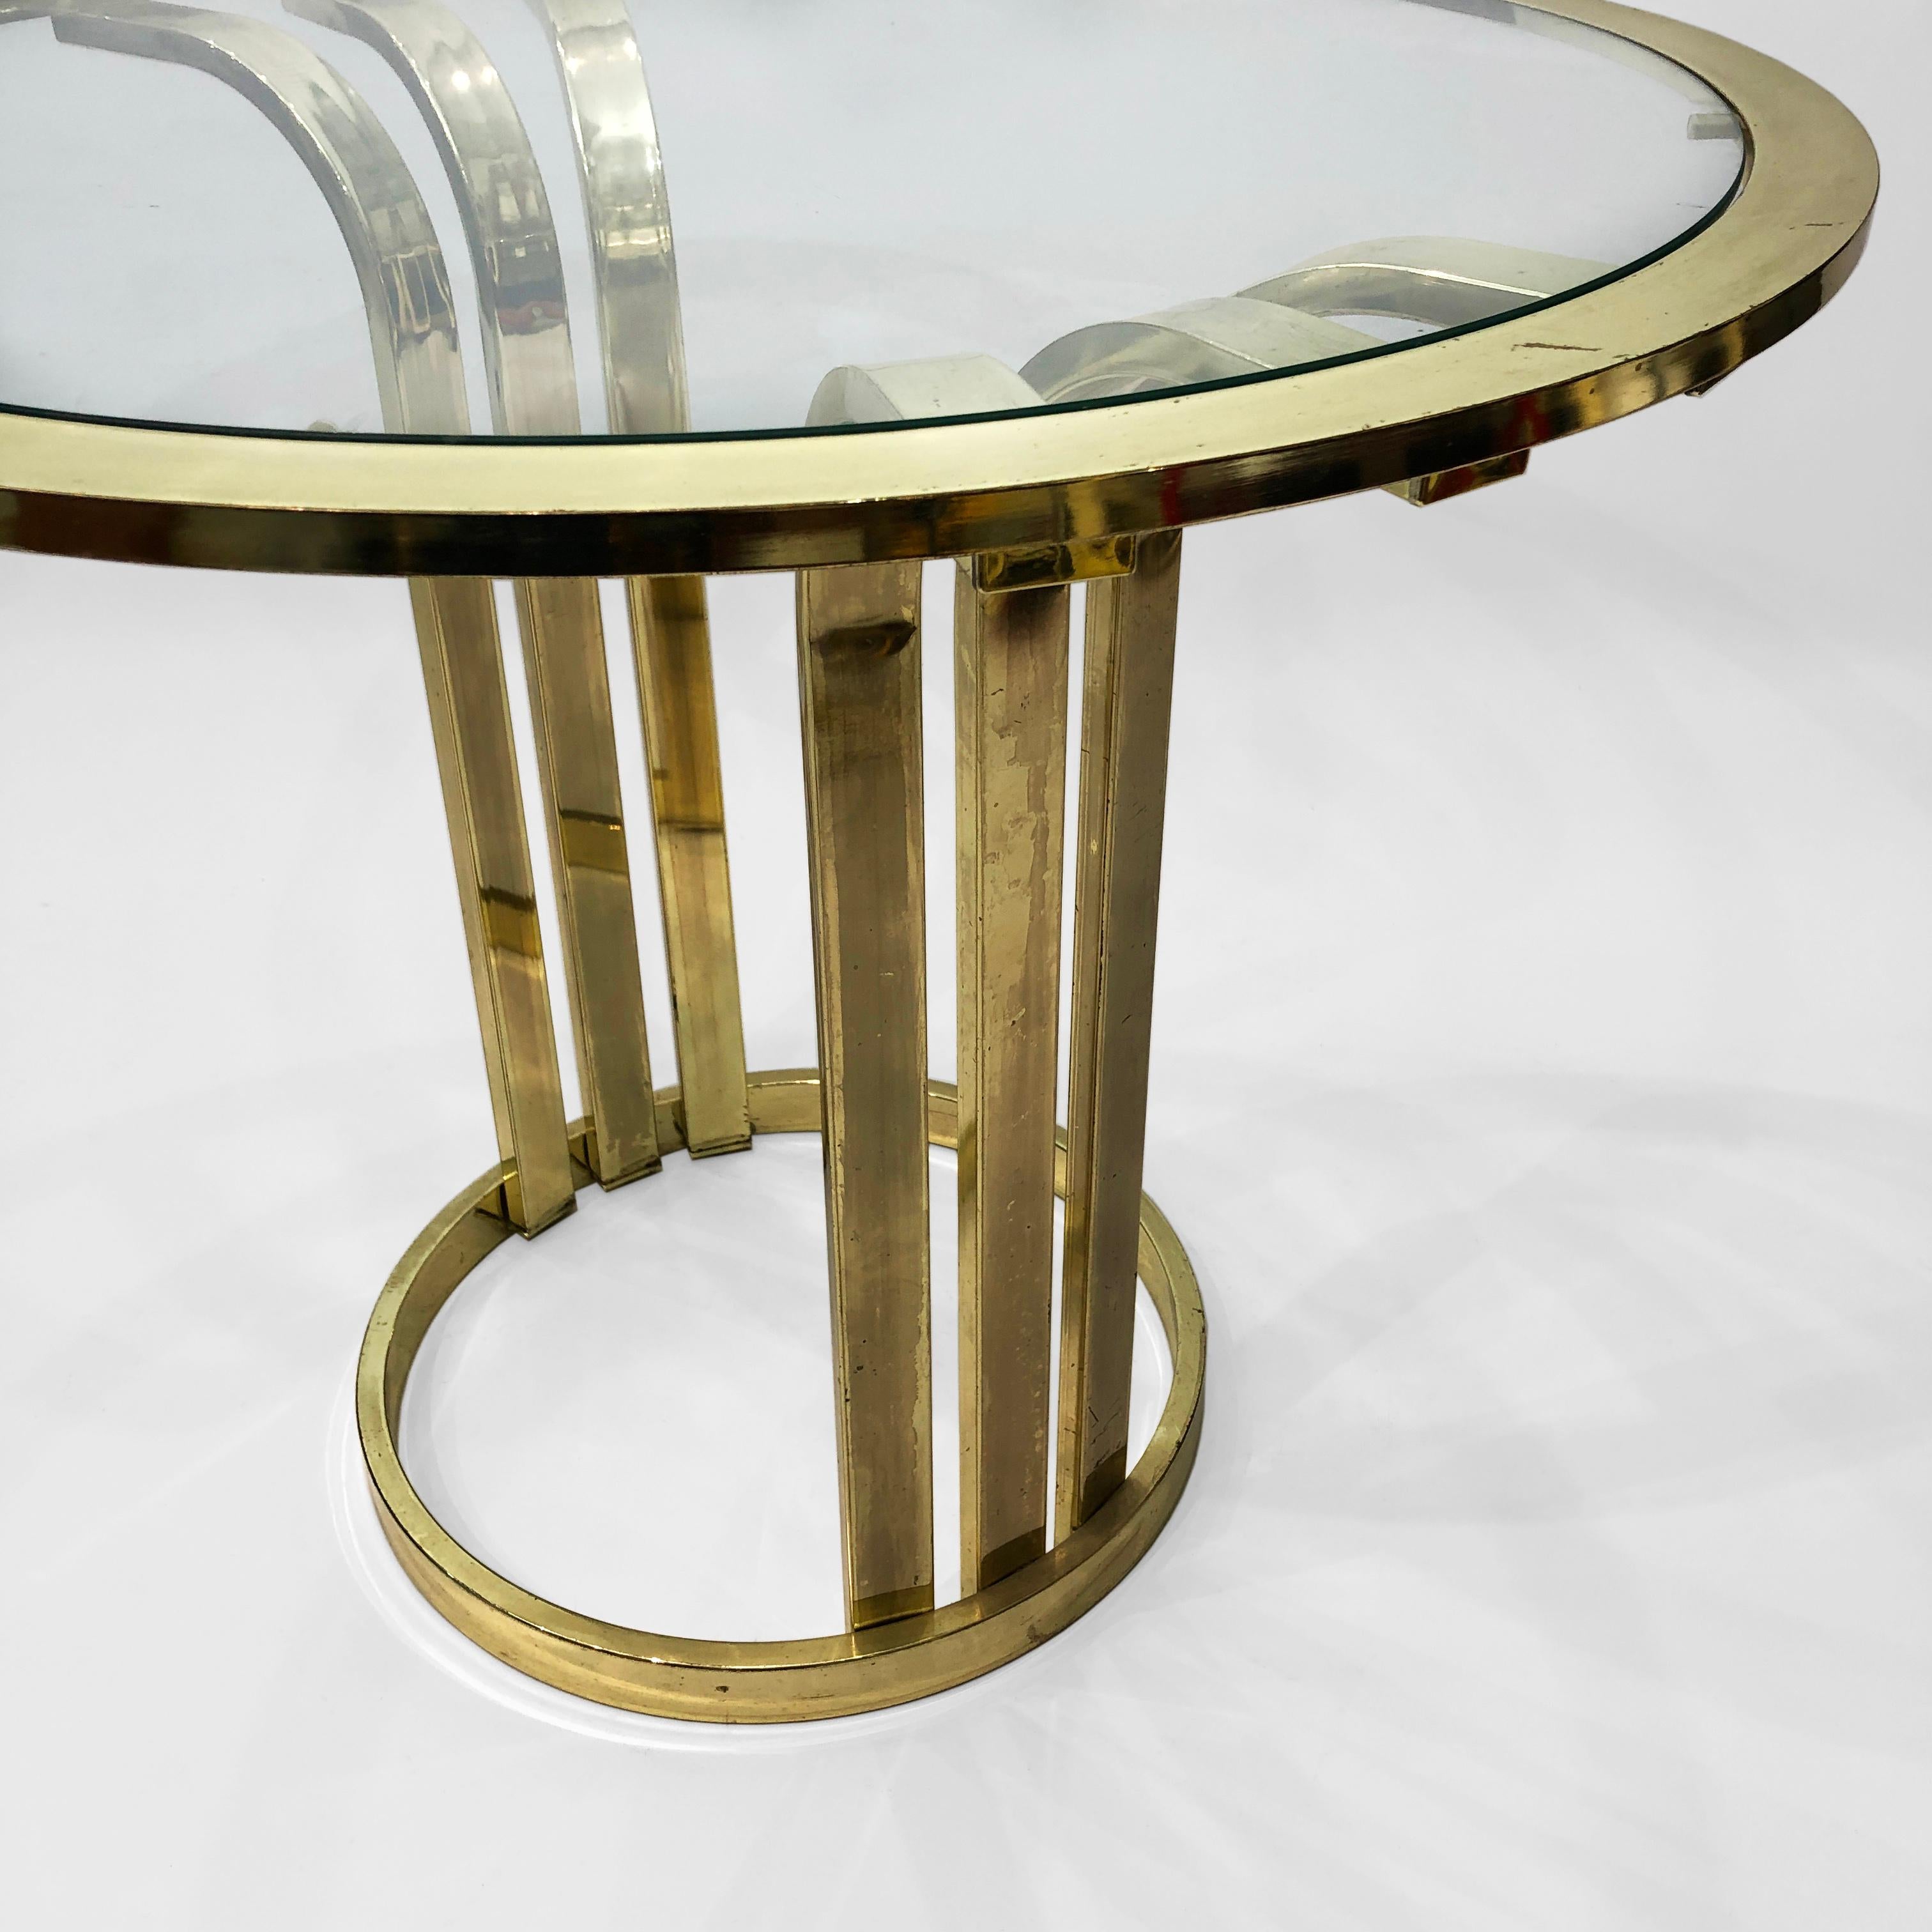 Brass Plated Art Deco Style Side Table 1970s Glamour Vintage Hollywood Regency For Sale 3